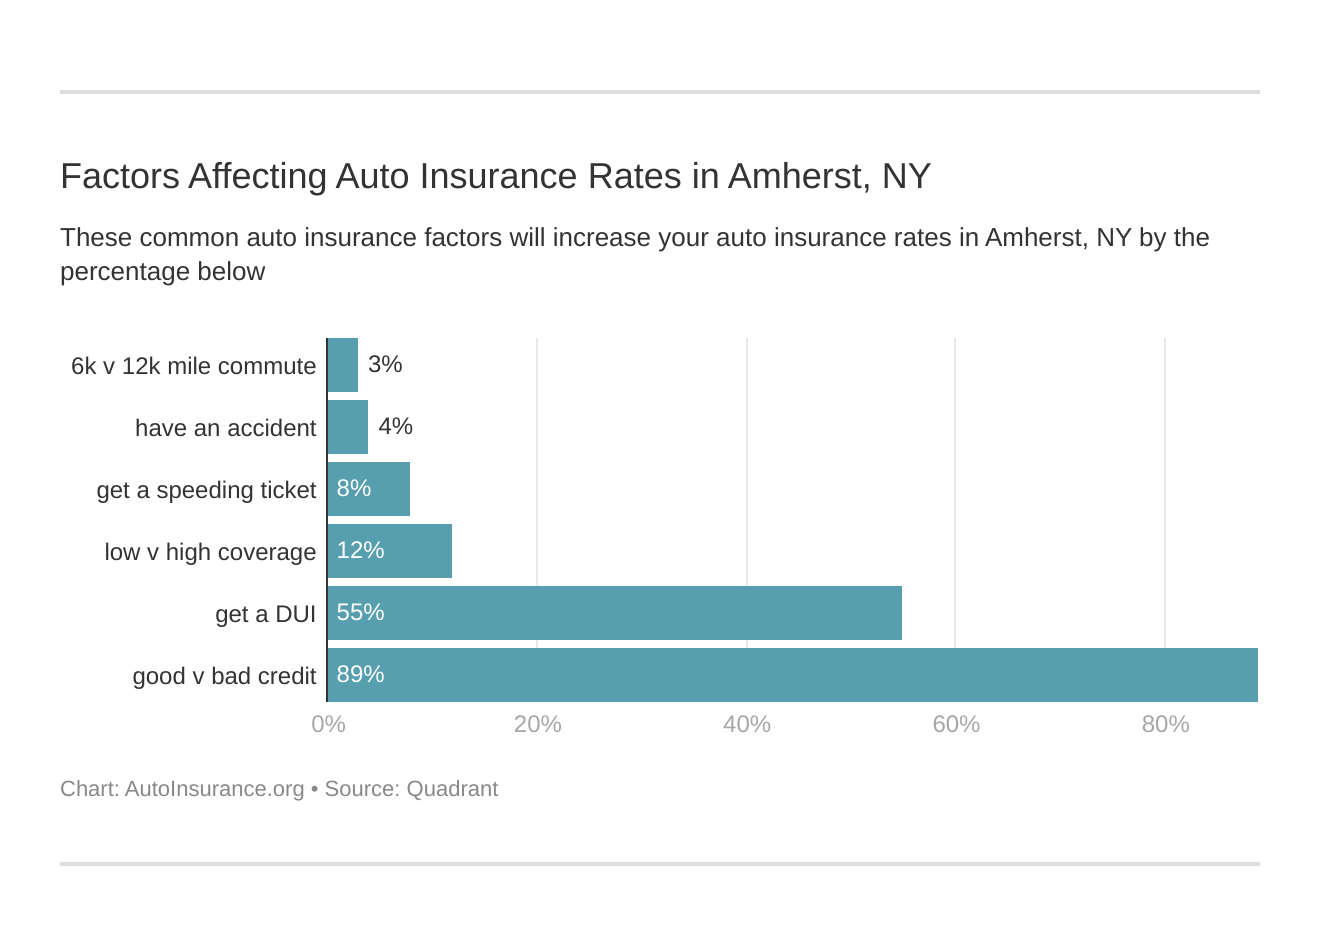 Factors Affecting Auto Insurance Rates in Amherst, NY